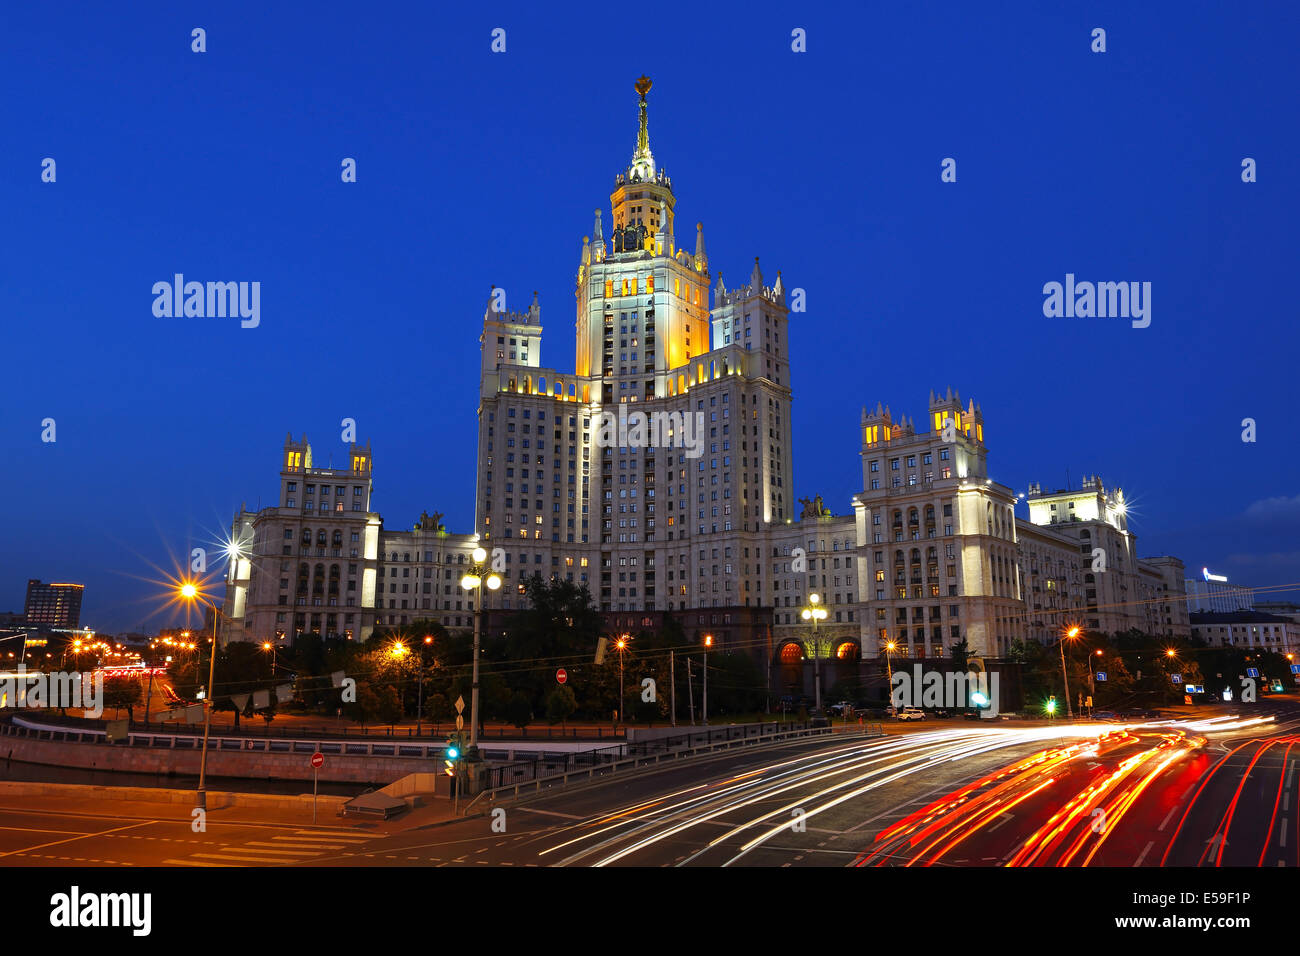 High-rise building on Kotelnicheskaya embankment in Moscow at night, Russia. Stock Photo